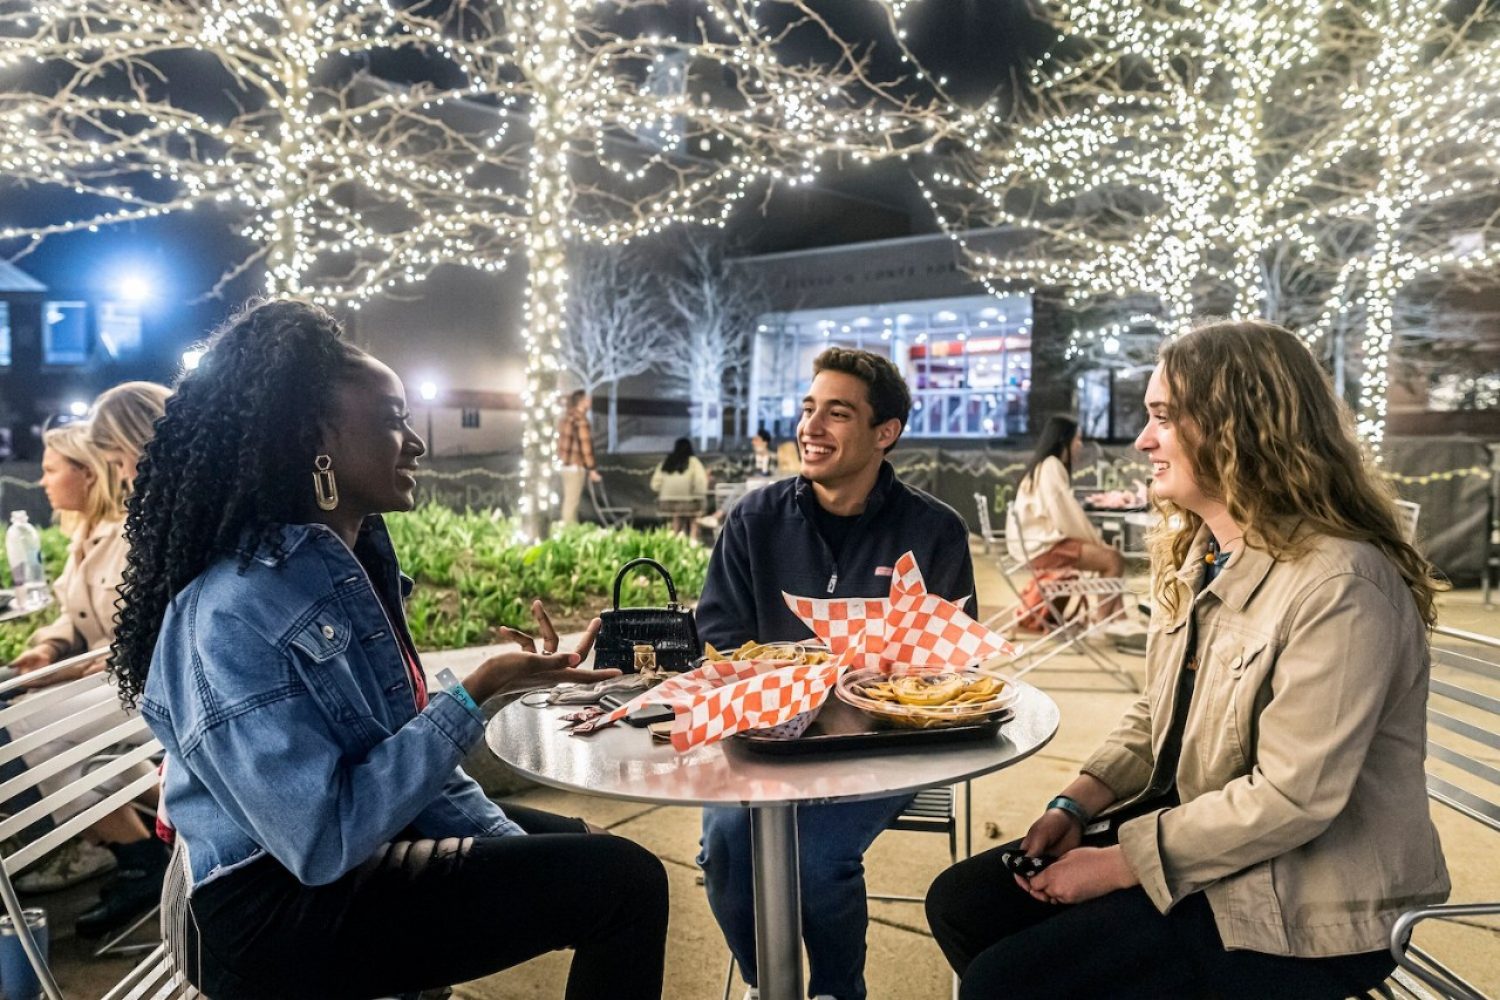 Three students eating outside at night